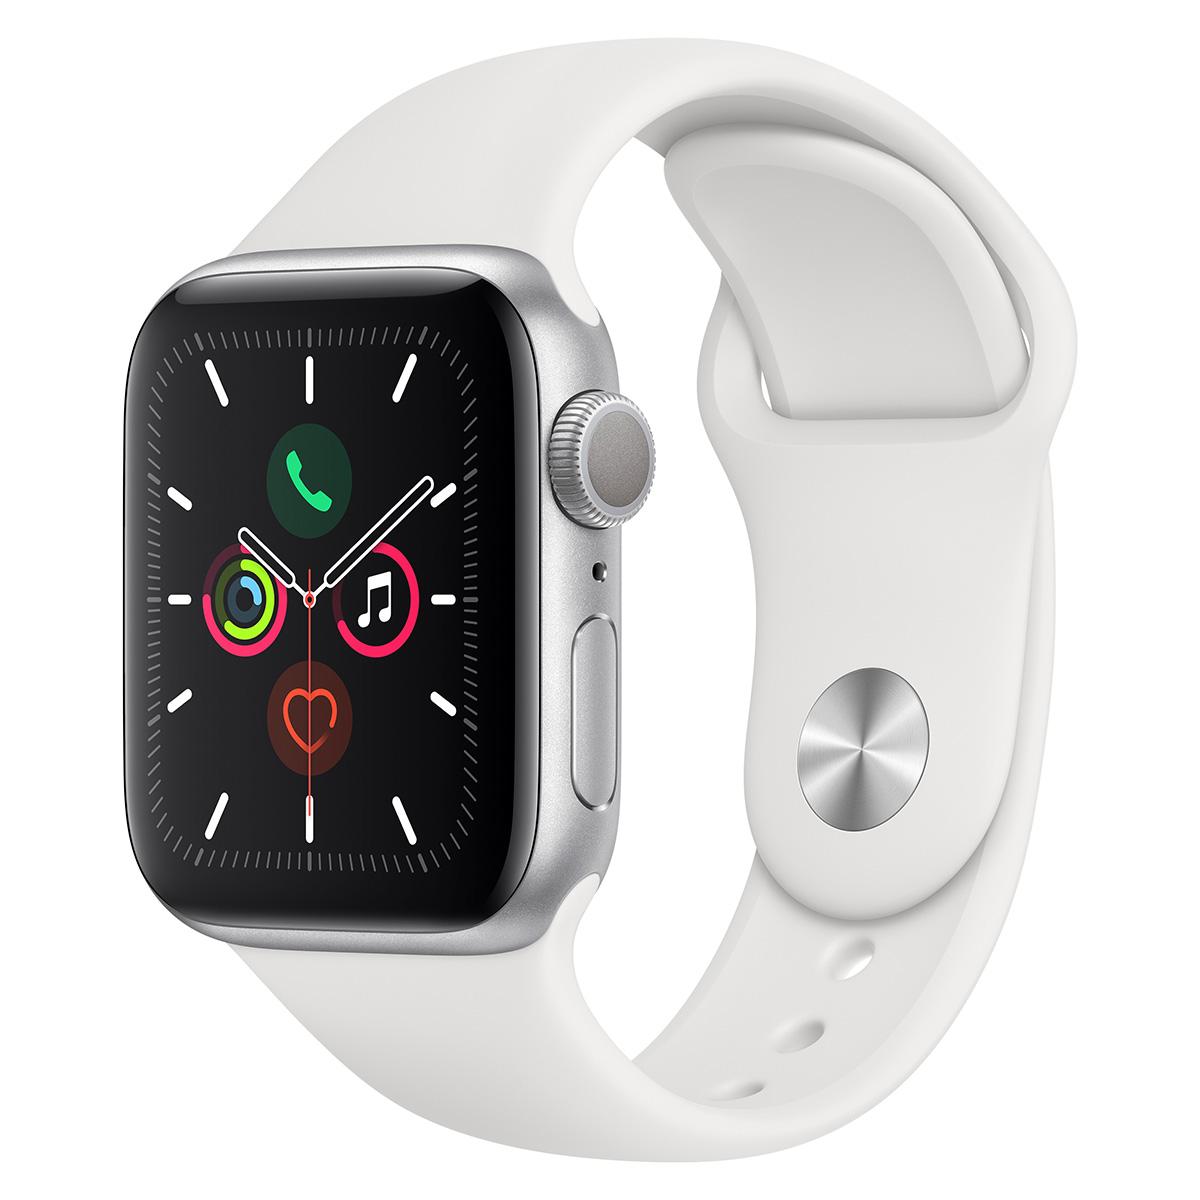 Apple Watch Series 5 GPS Smartwatch for $299 Shipped